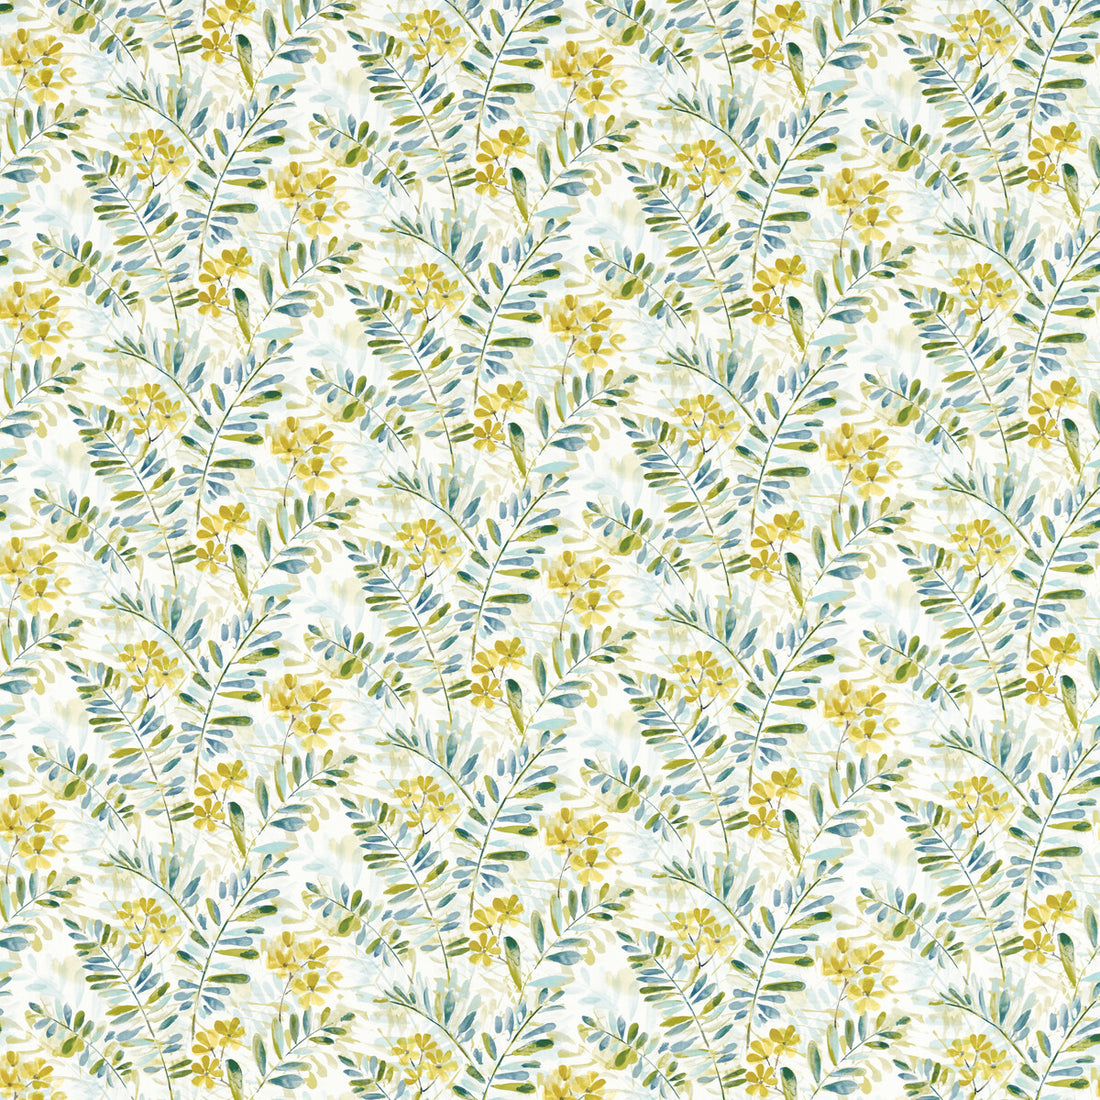 New Grove fabric in denim/citrus color - pattern F1560/02.CAC.0 - by Clarke And Clarke in the Country Escape By Studio G For C&amp;C collection